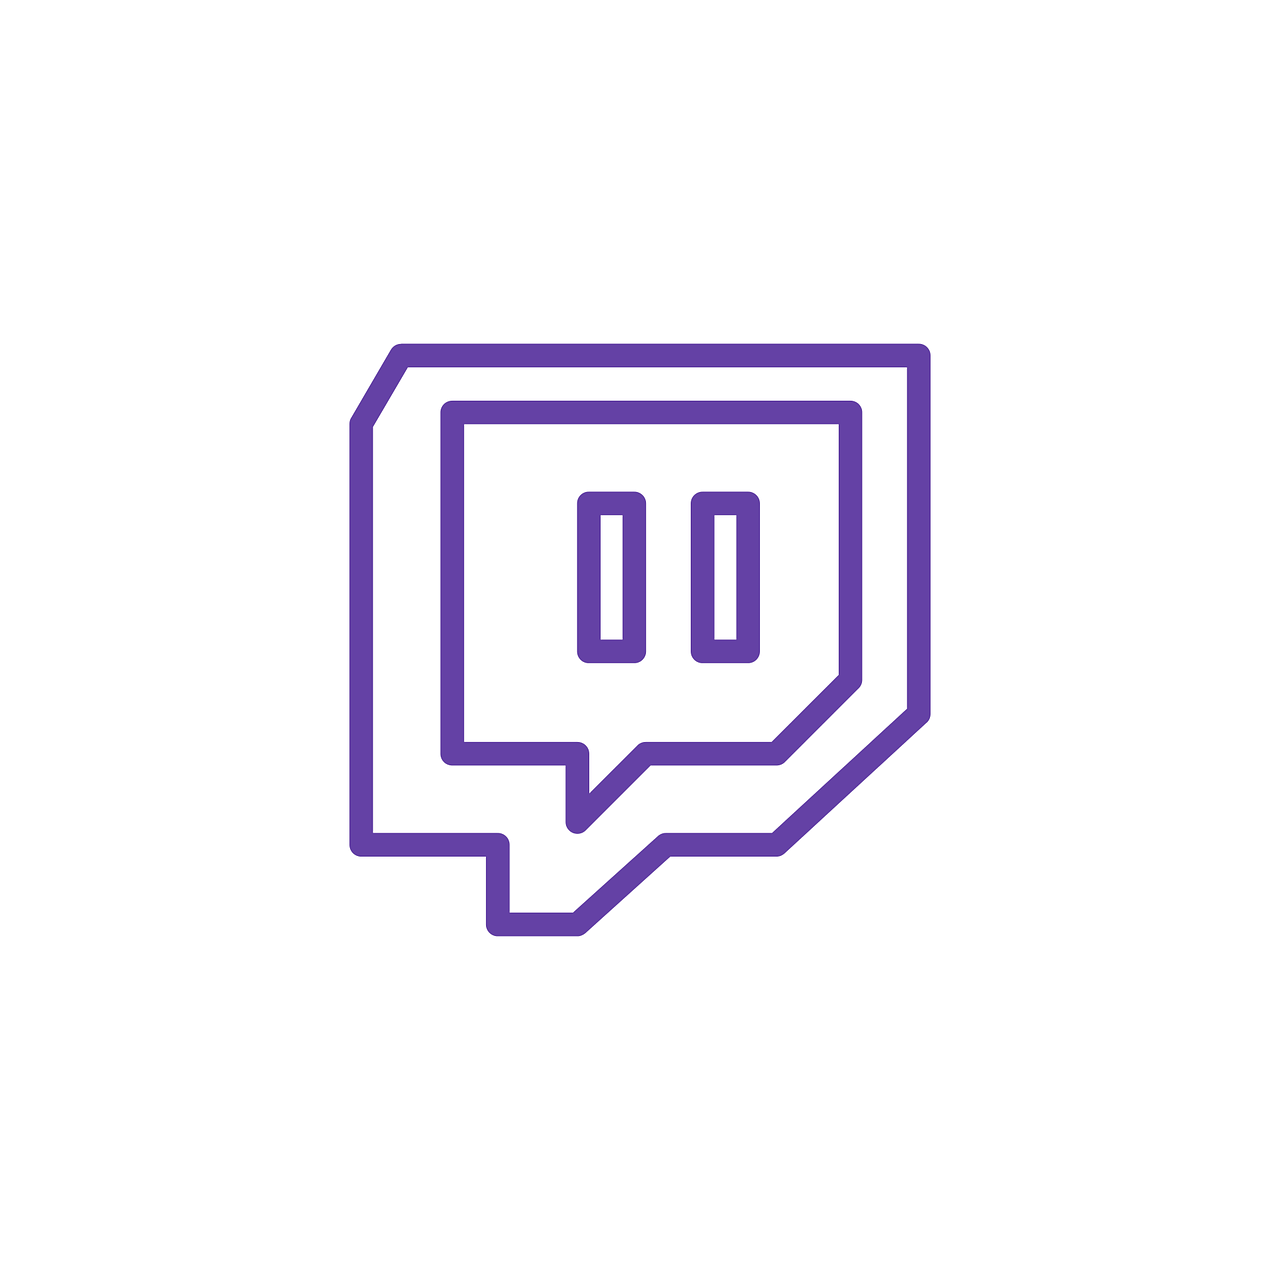 twitch is so popular that downloading streams is now ideal